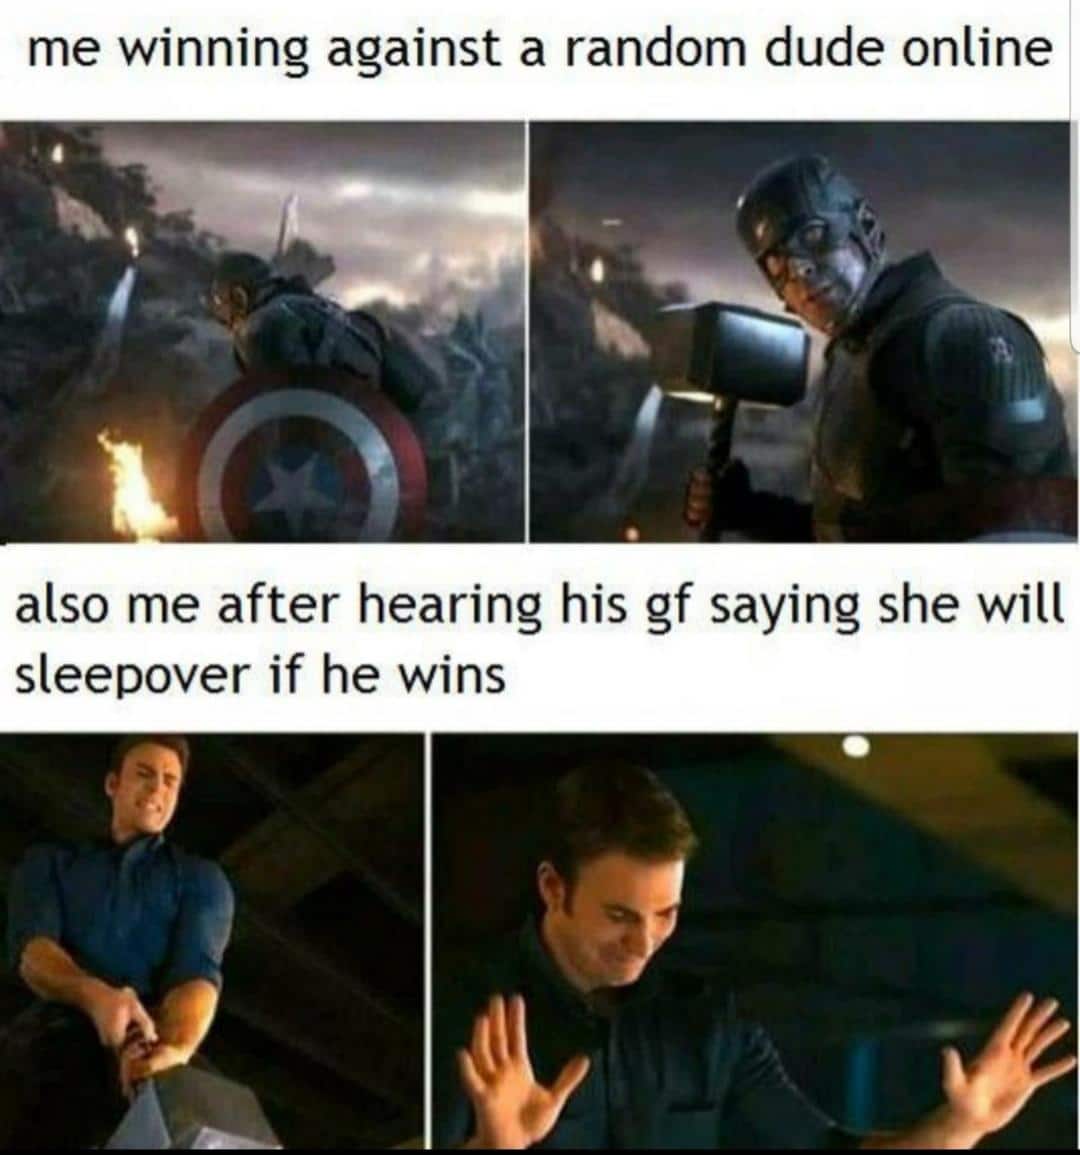 Wholesome memes,  Wholesome Memes Wholesome memes,  text: me winning against a random dude online also me after hearing his gf saying she will sleepover if he wins 